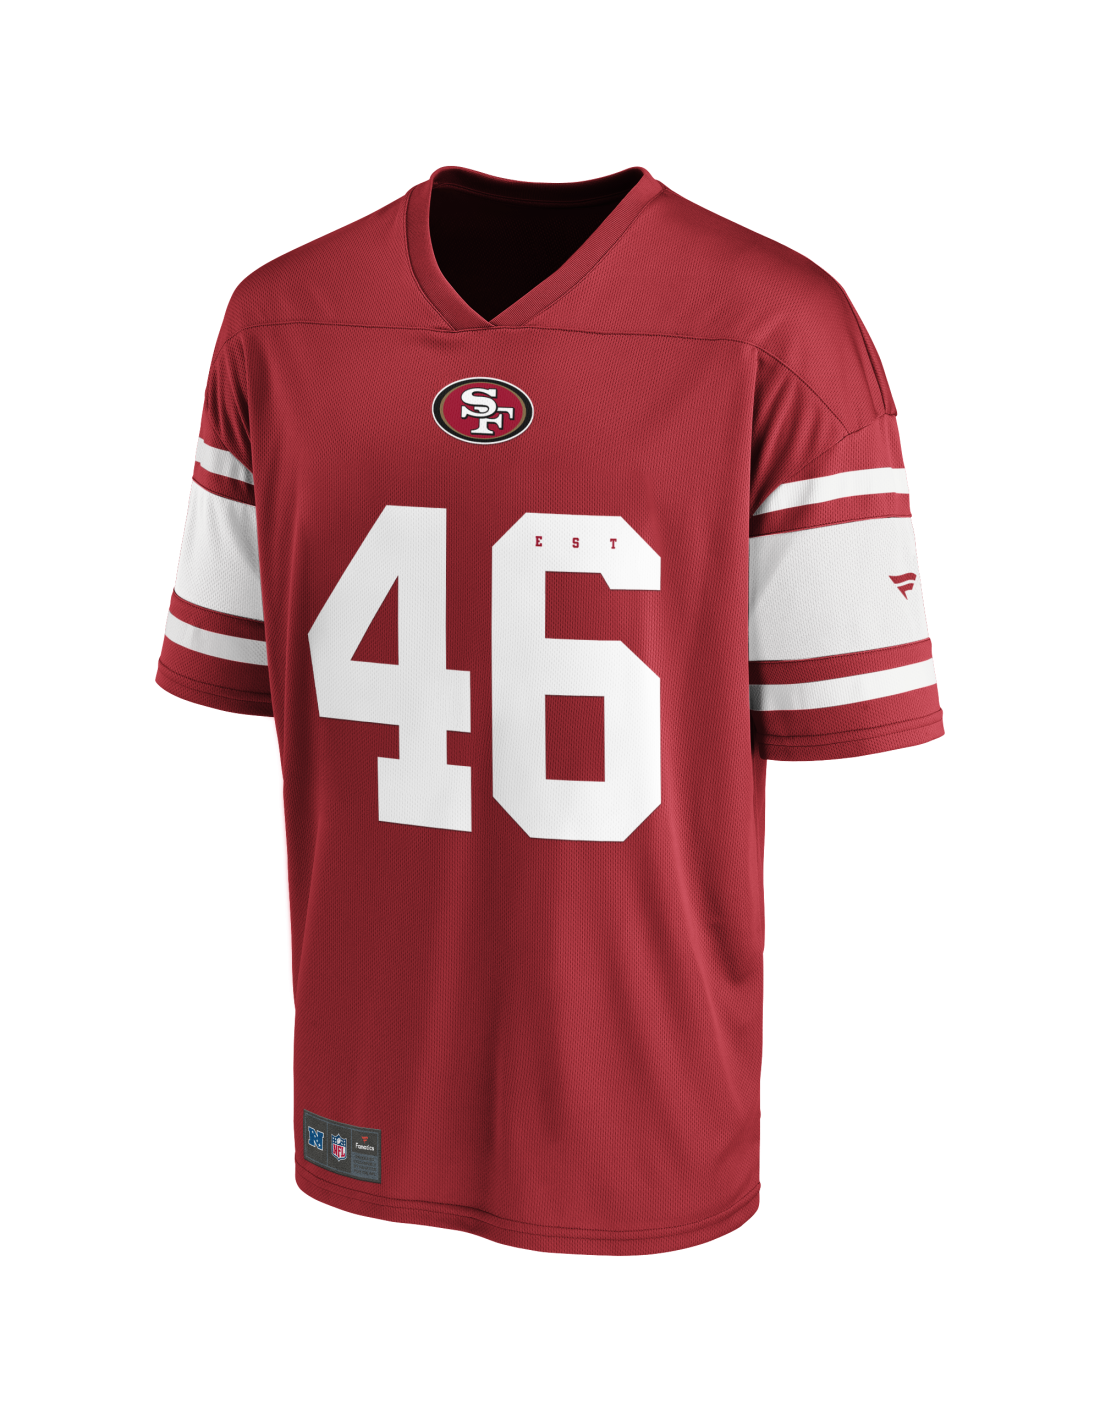 San Francisco 49ers Foundation Supporters Jersey